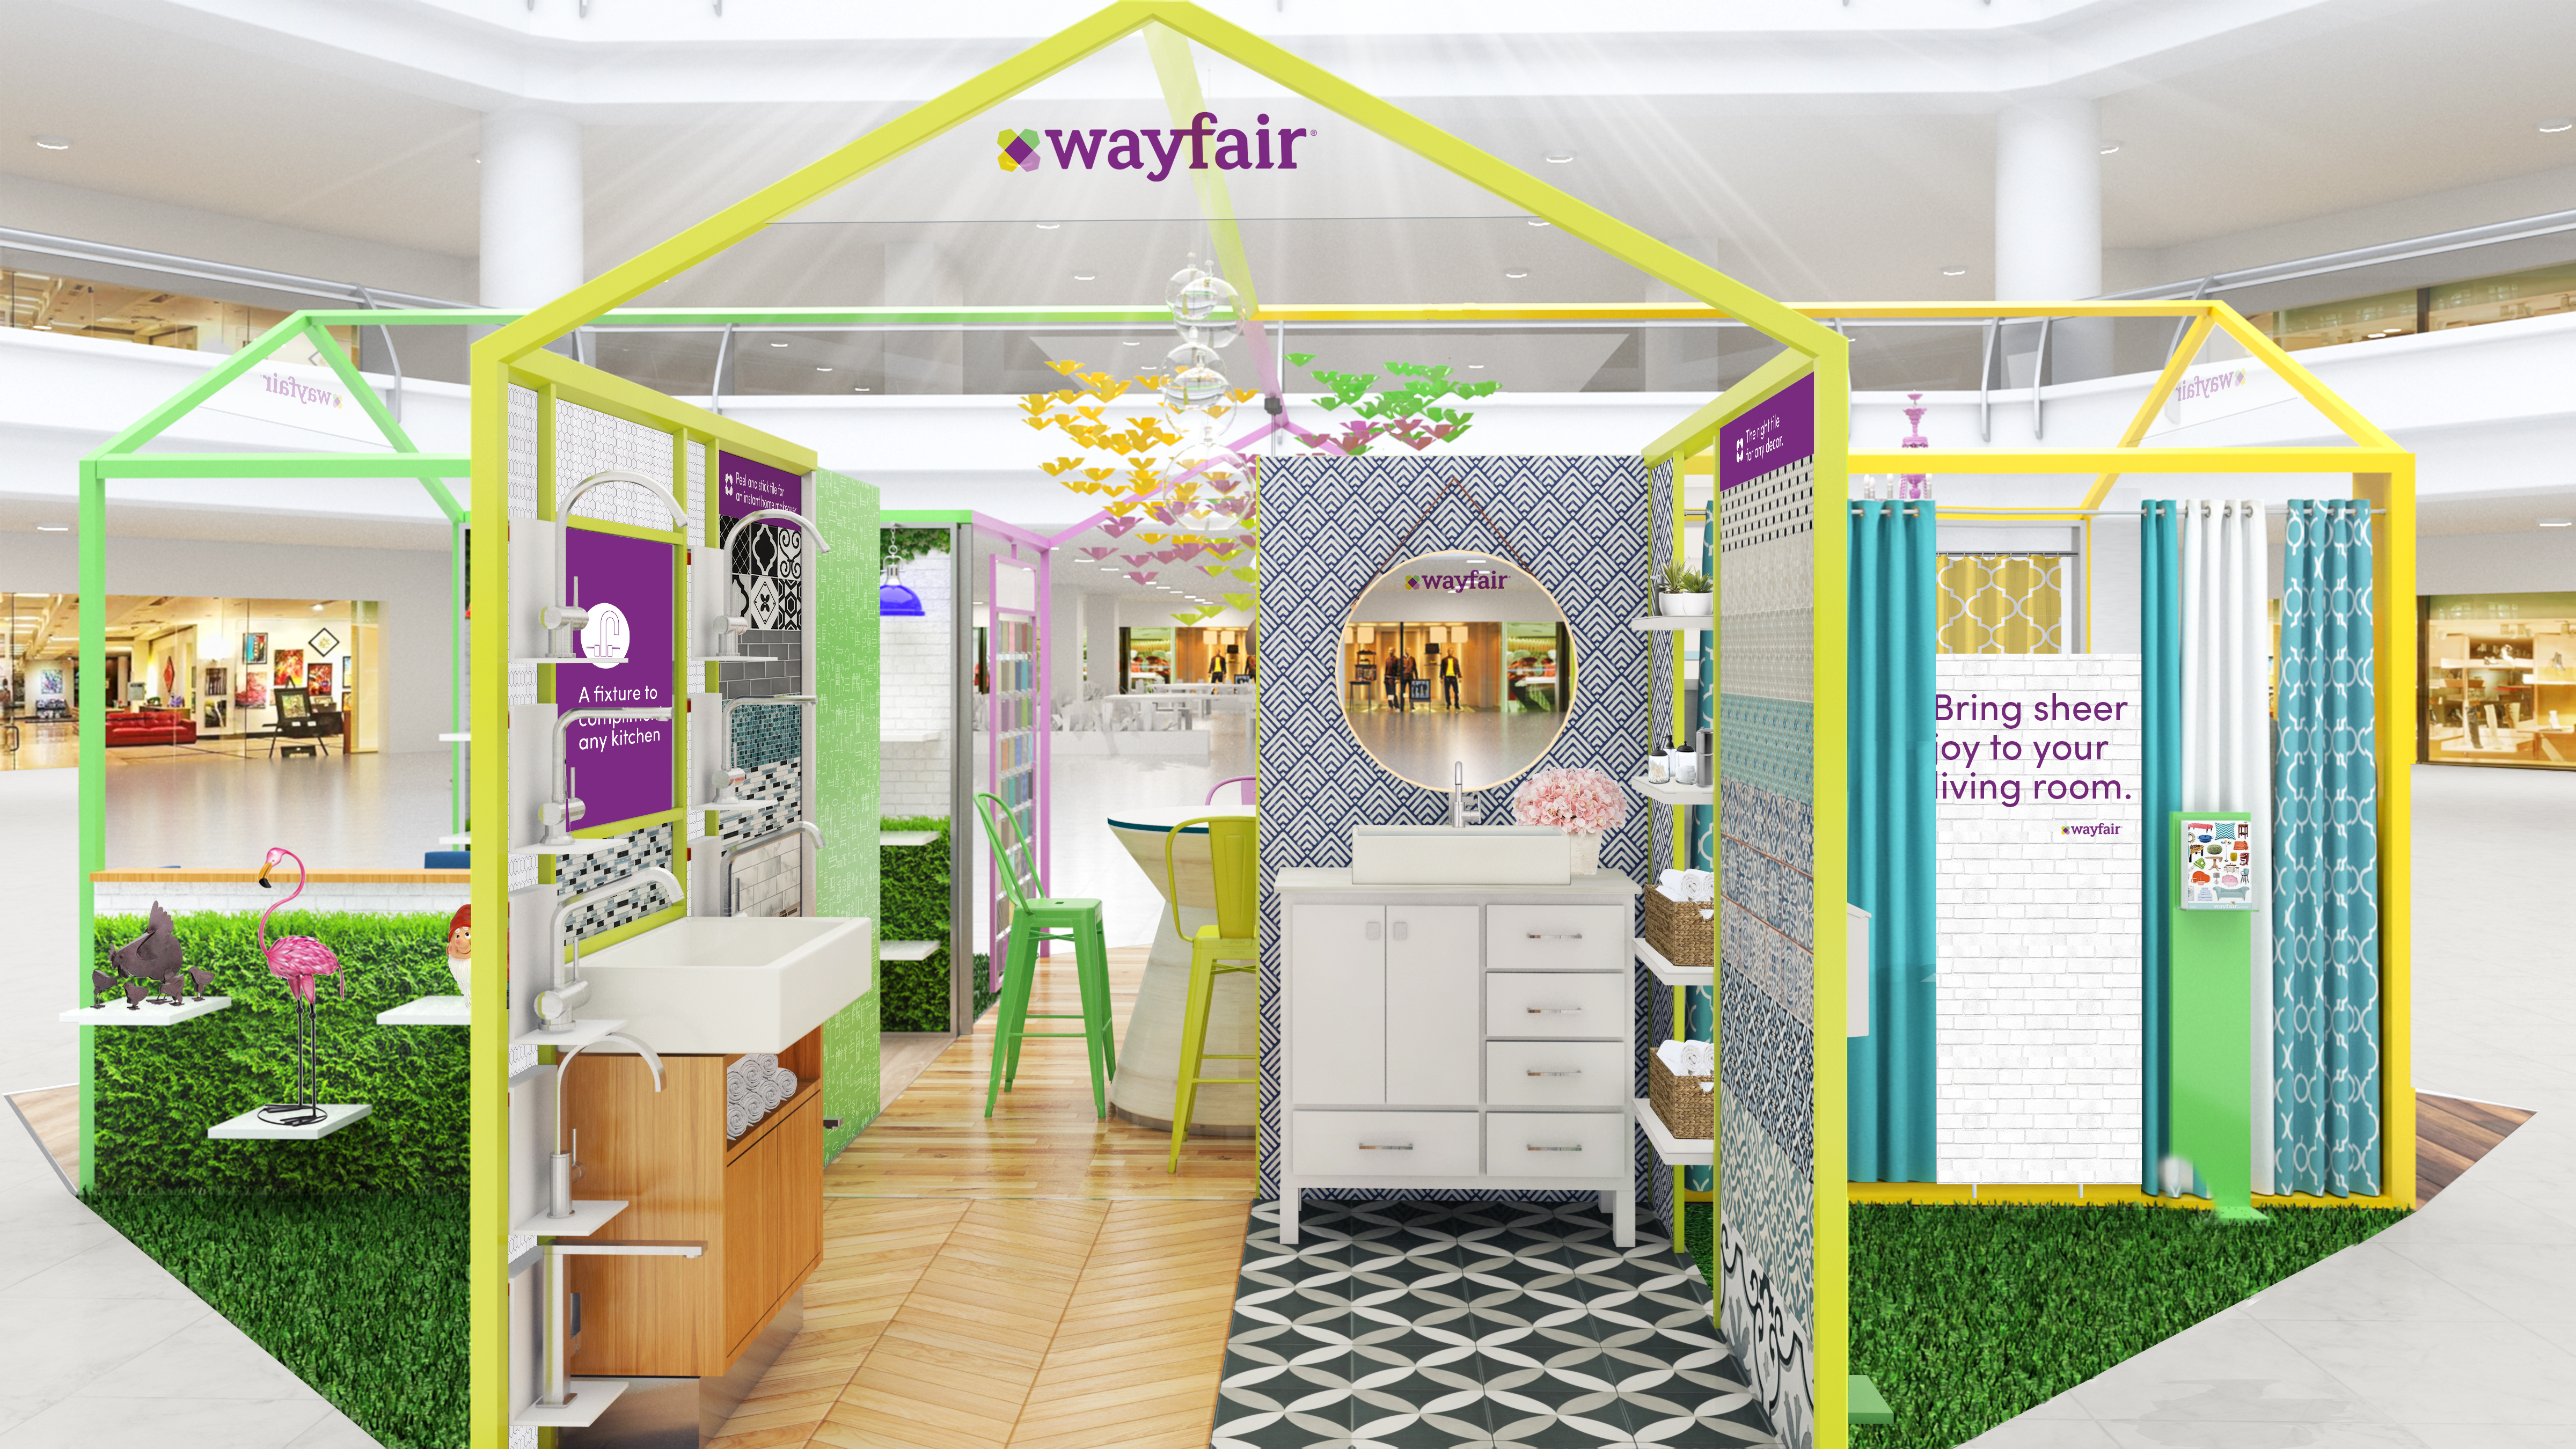 Wayfair to Launch Pop-Up Retail Experience for the Holiday Season